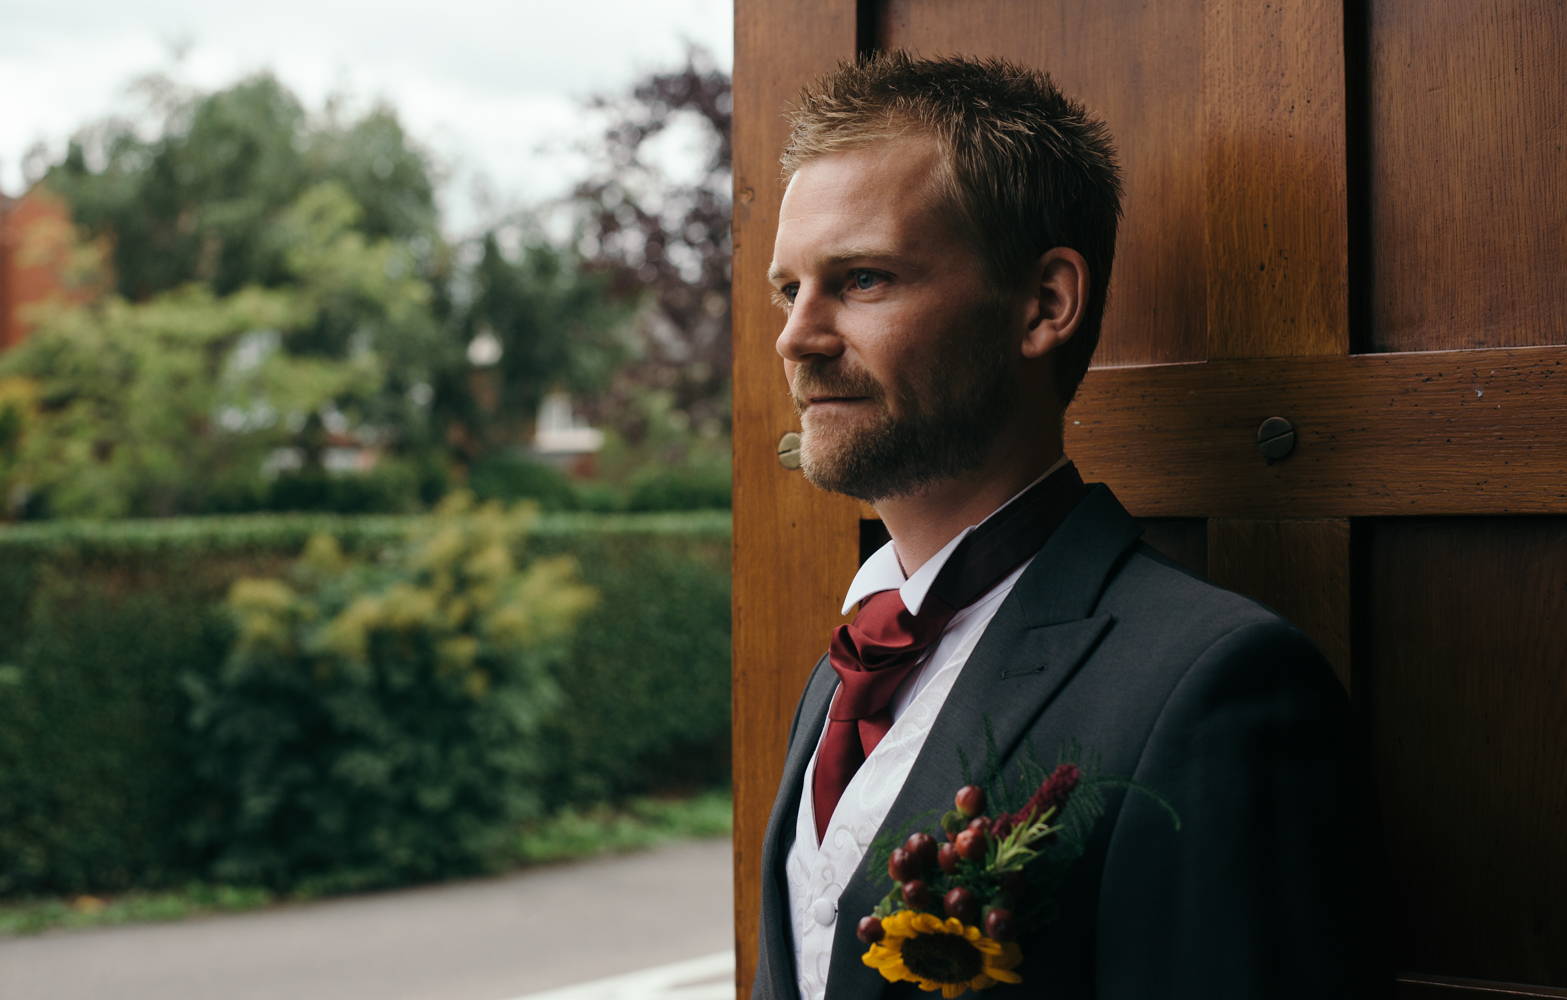 A rather nervous looking groom awaiting the arrival of the bride 